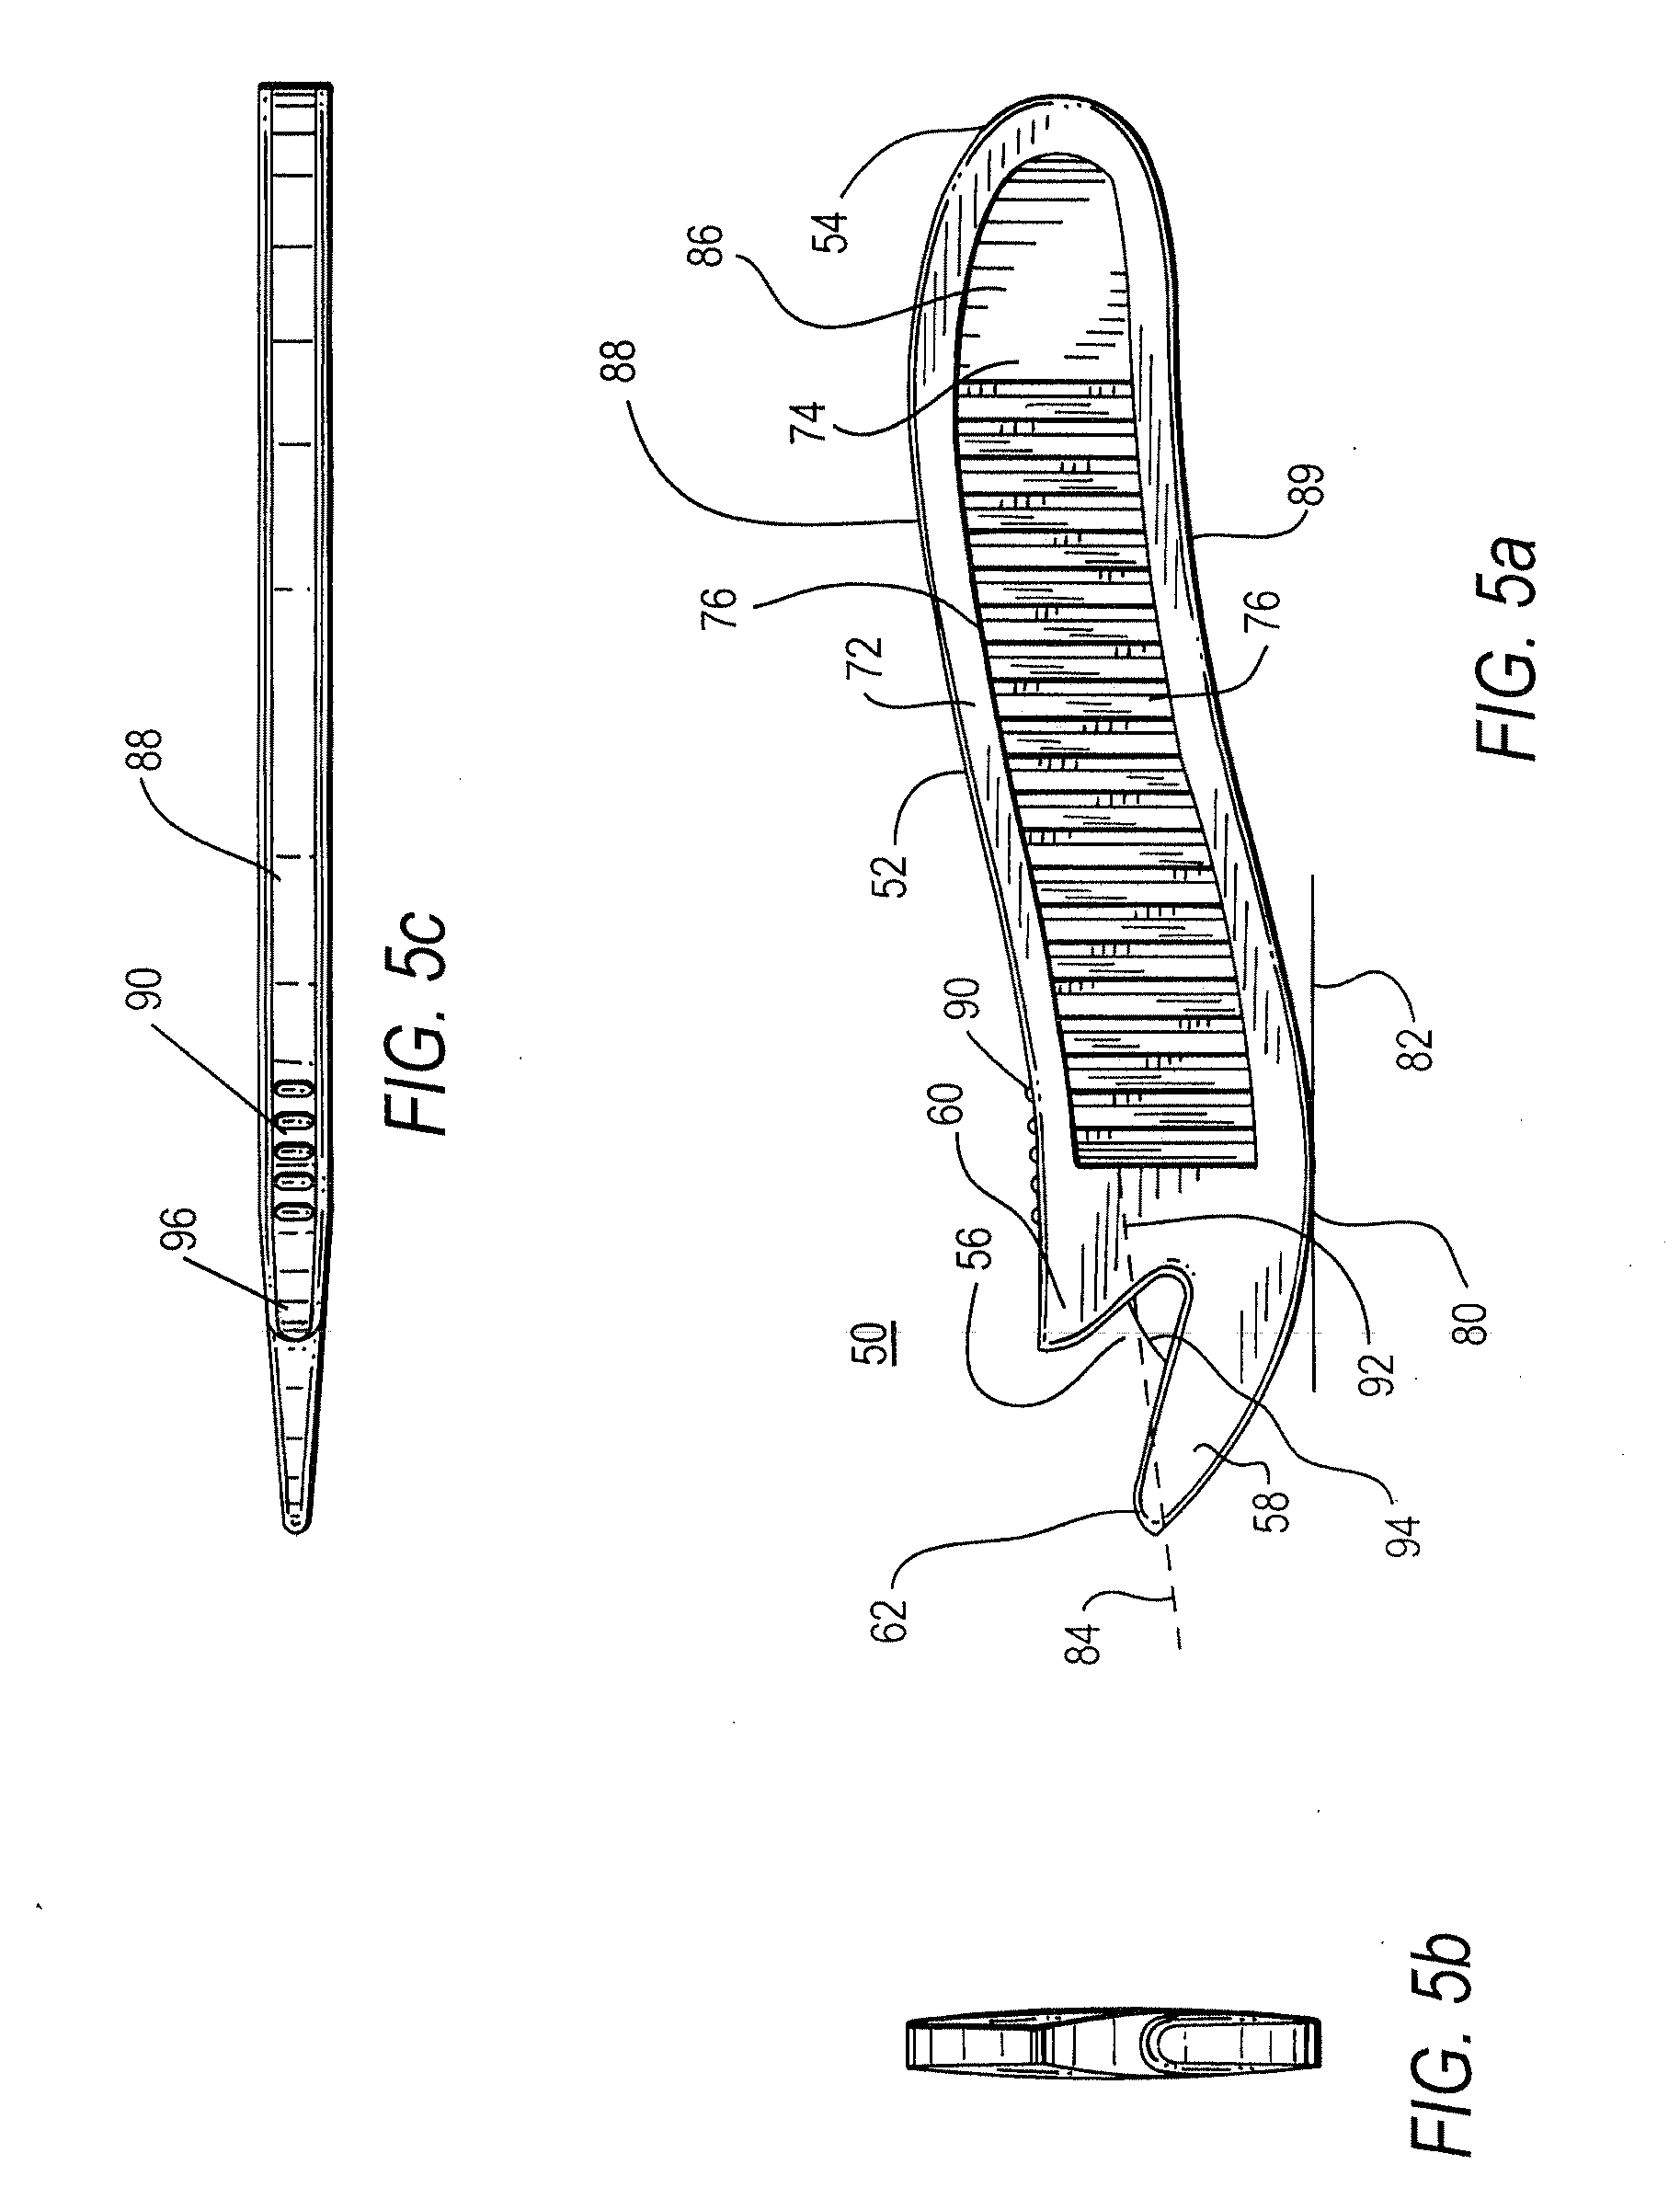 Device for performing surgery